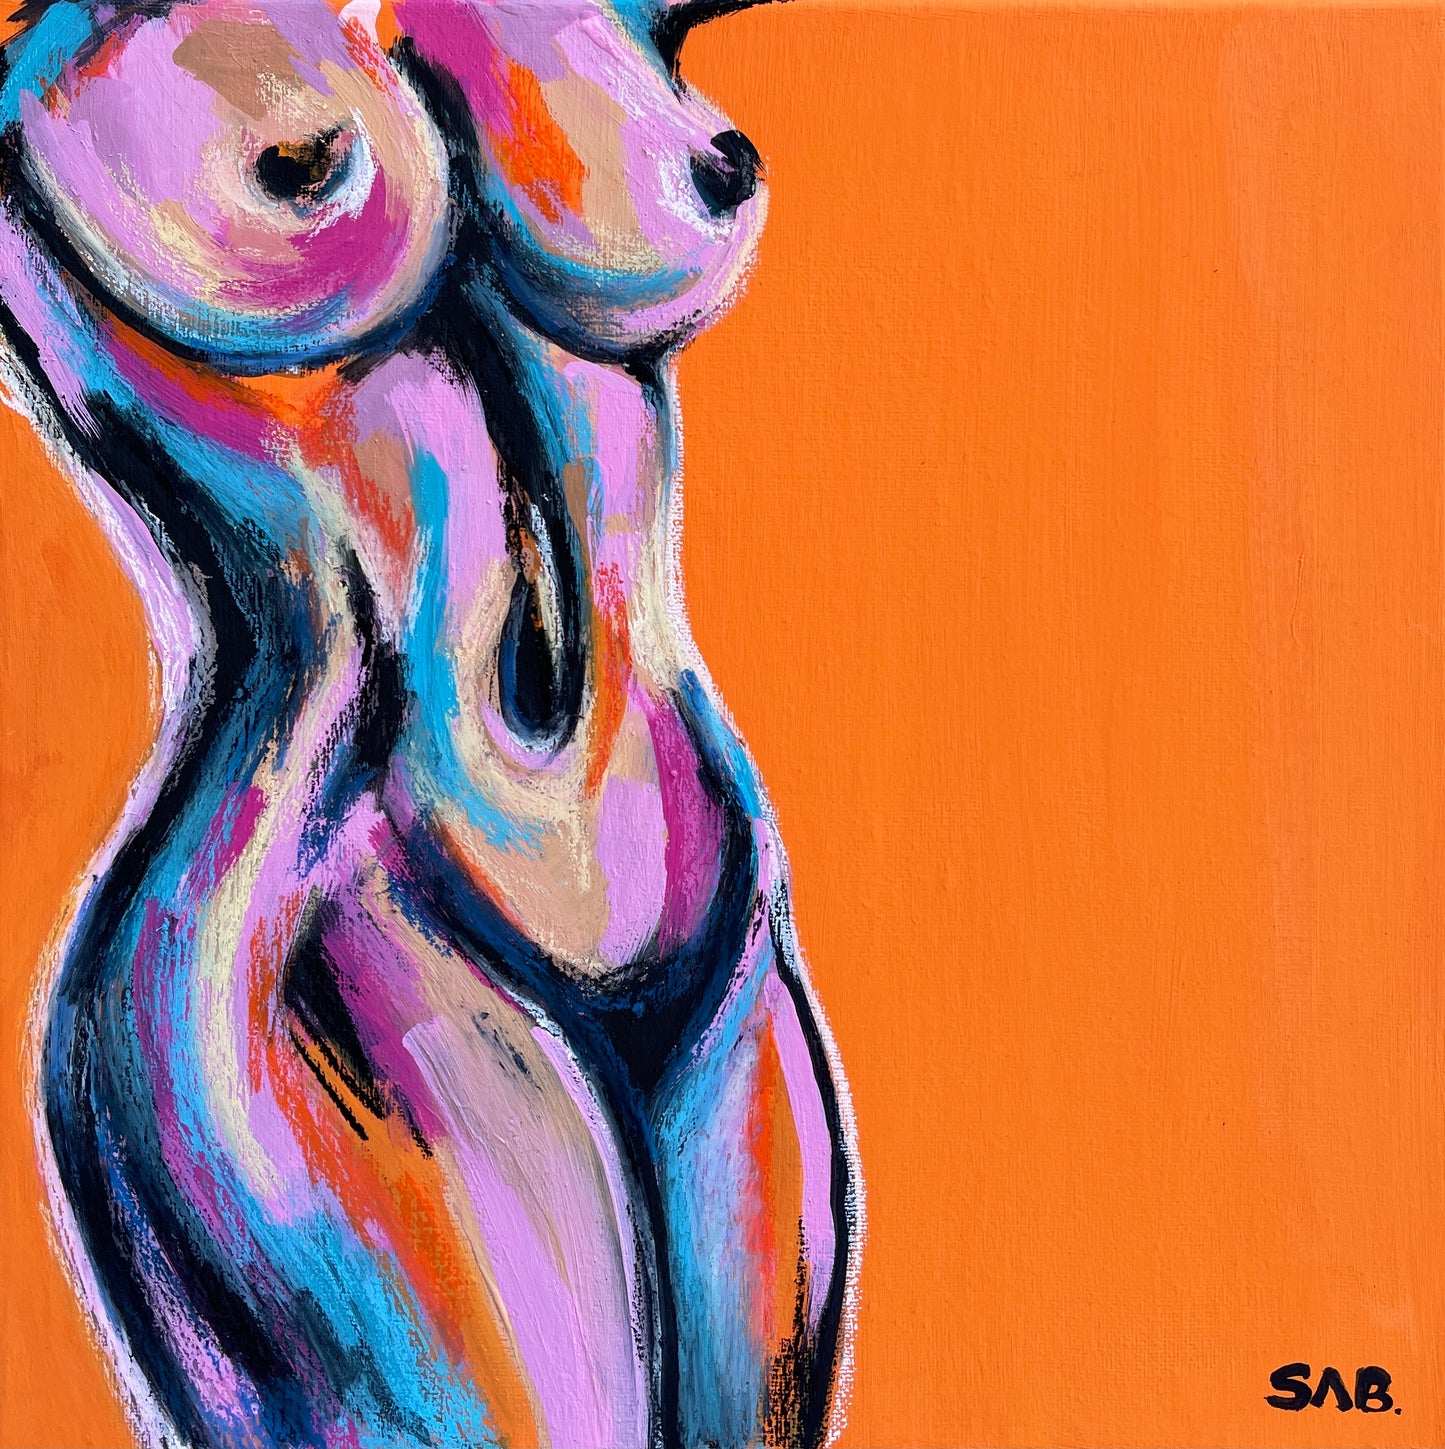 Female Figurative Nude sexy Colorful canvas painting Print 9x12